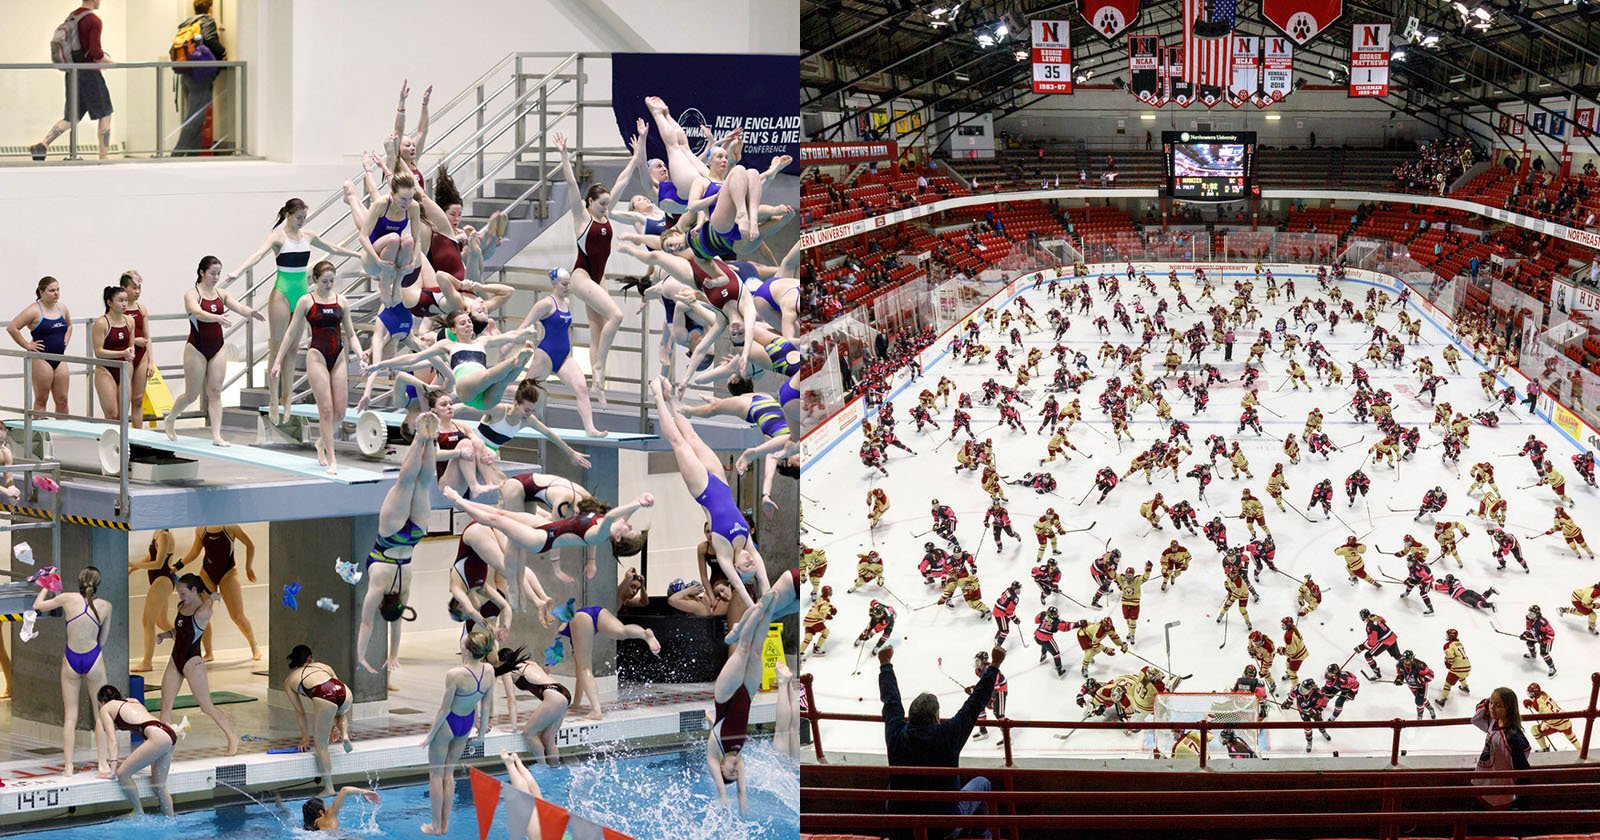 Hours of Sport Events Photoshopped Into Dizzying Single Photos